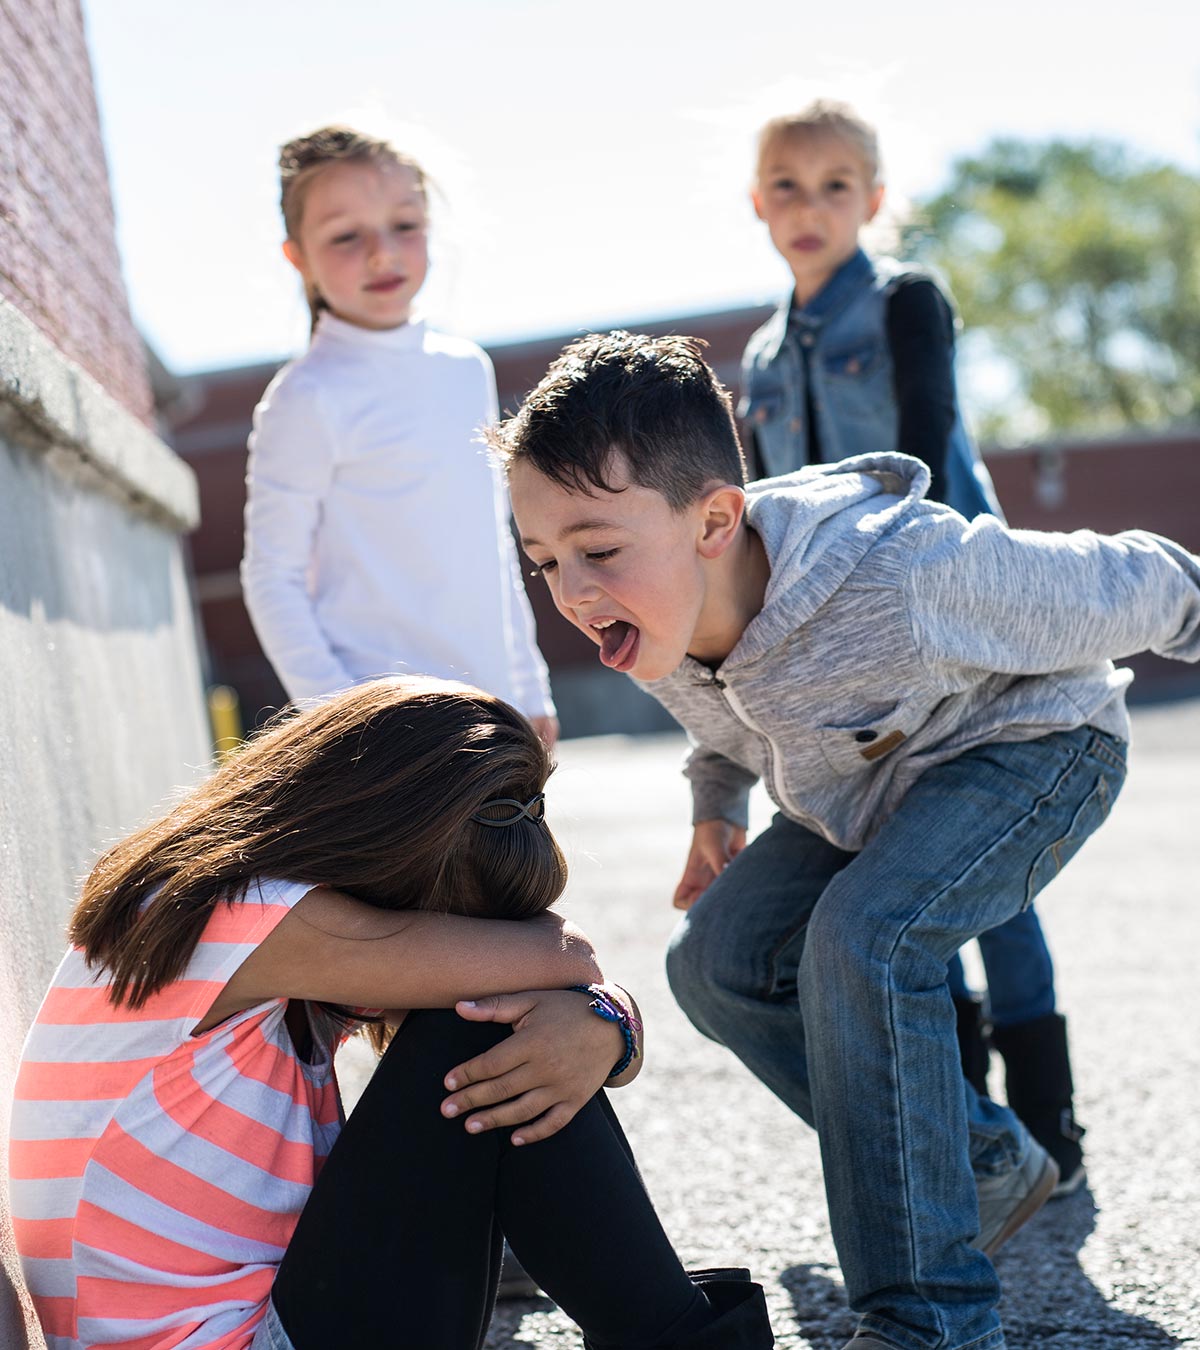 Why Do Kids Bully And What To Do If Your Child Is Being Bullied?